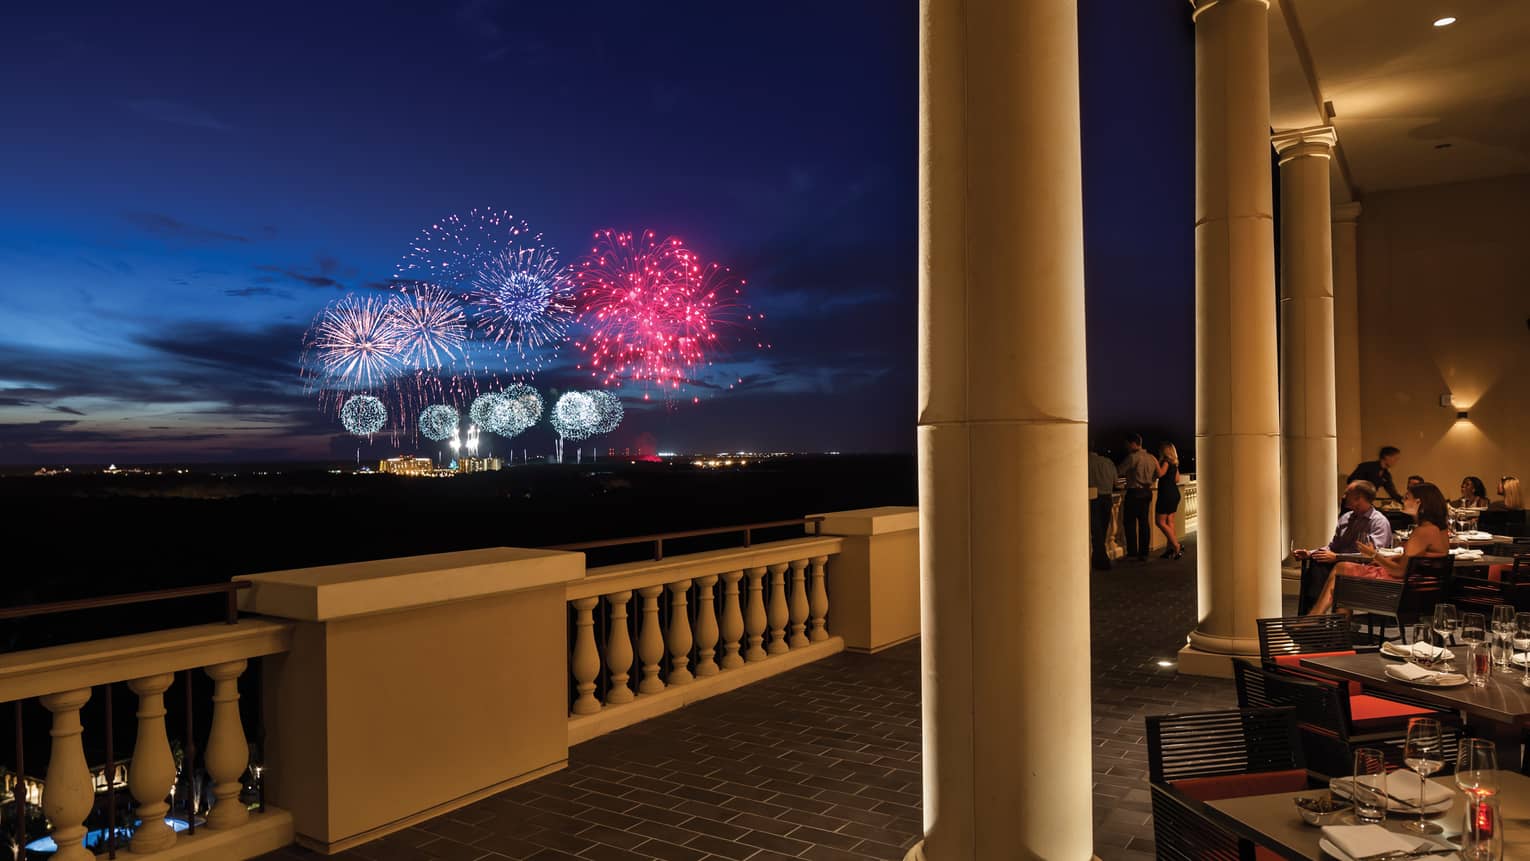 View of Disney fireworks from the balcony at Capa. [credit: Four Seasons]